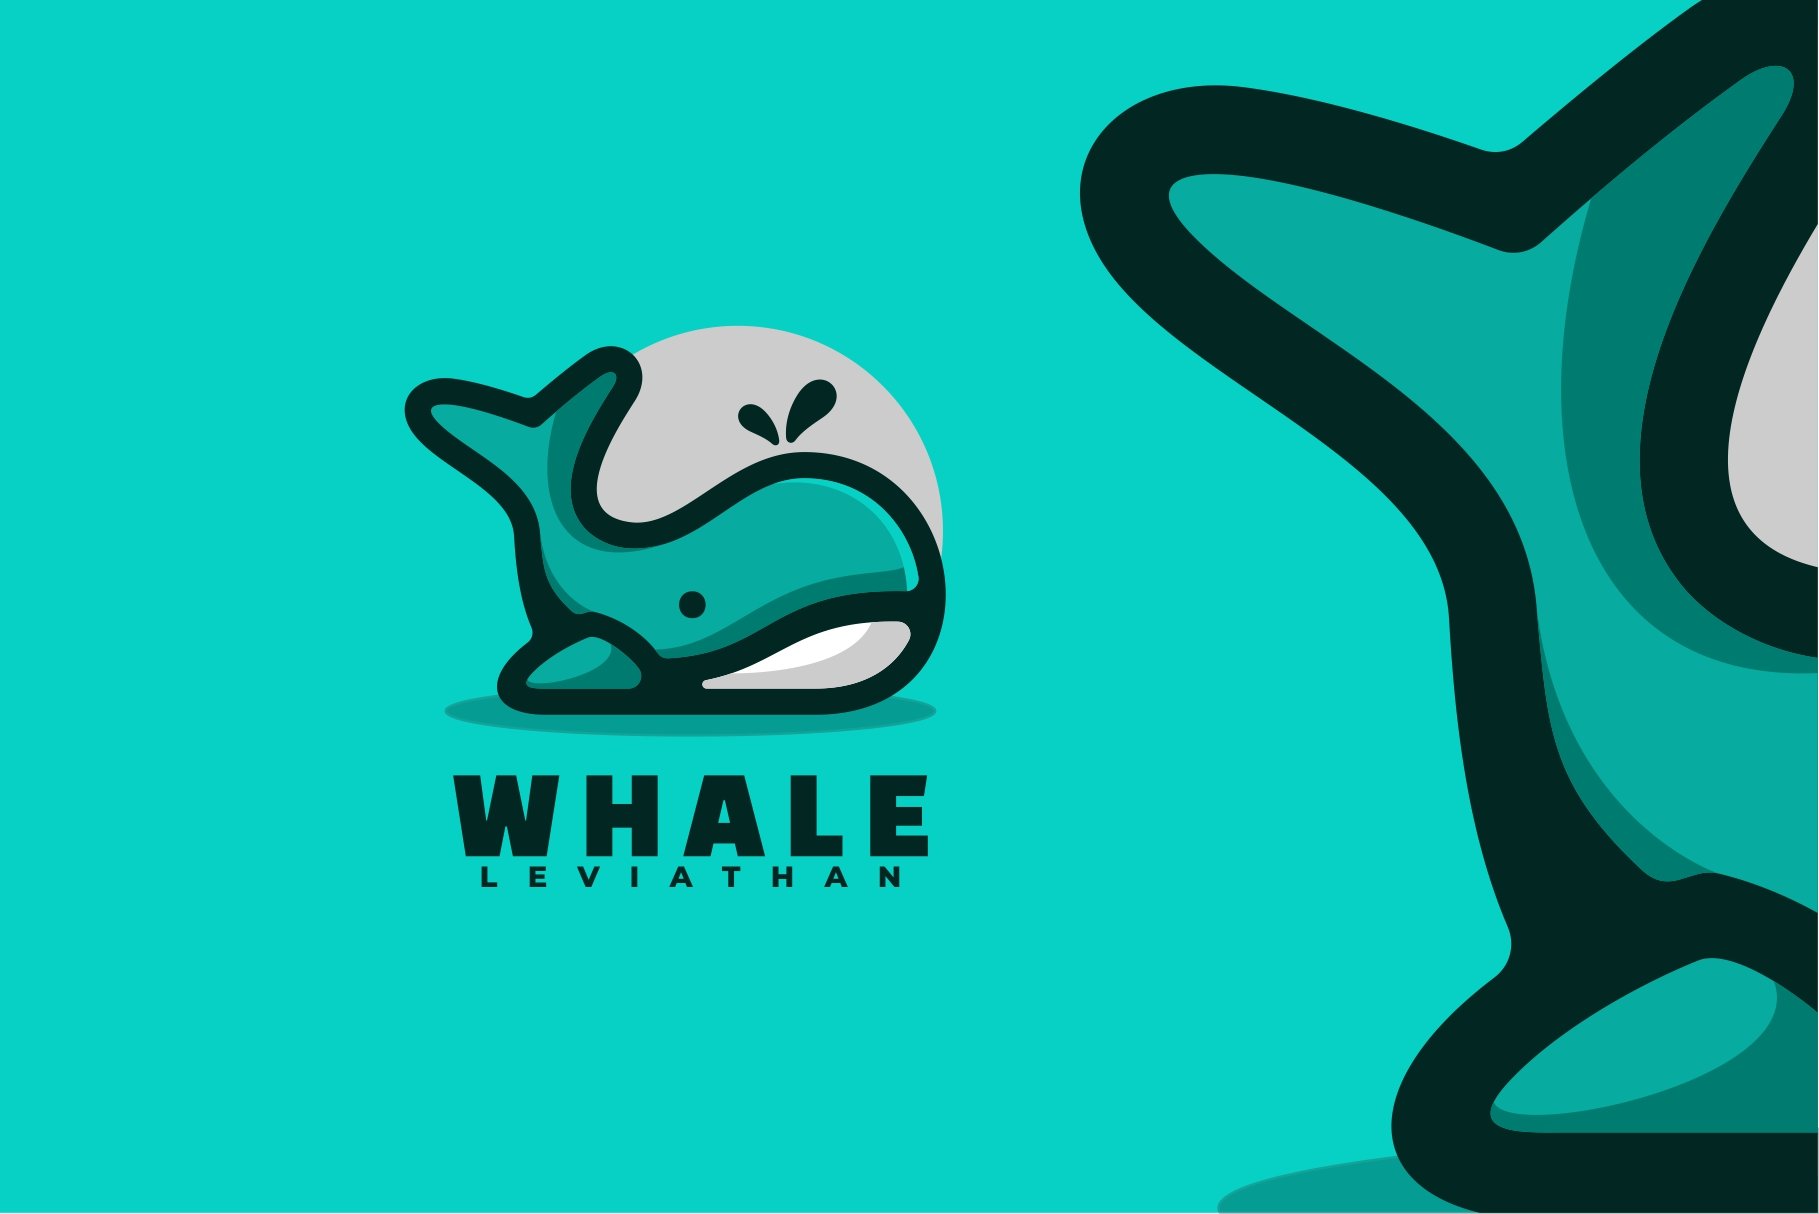 Whale Simple Mascot Logo cover image.